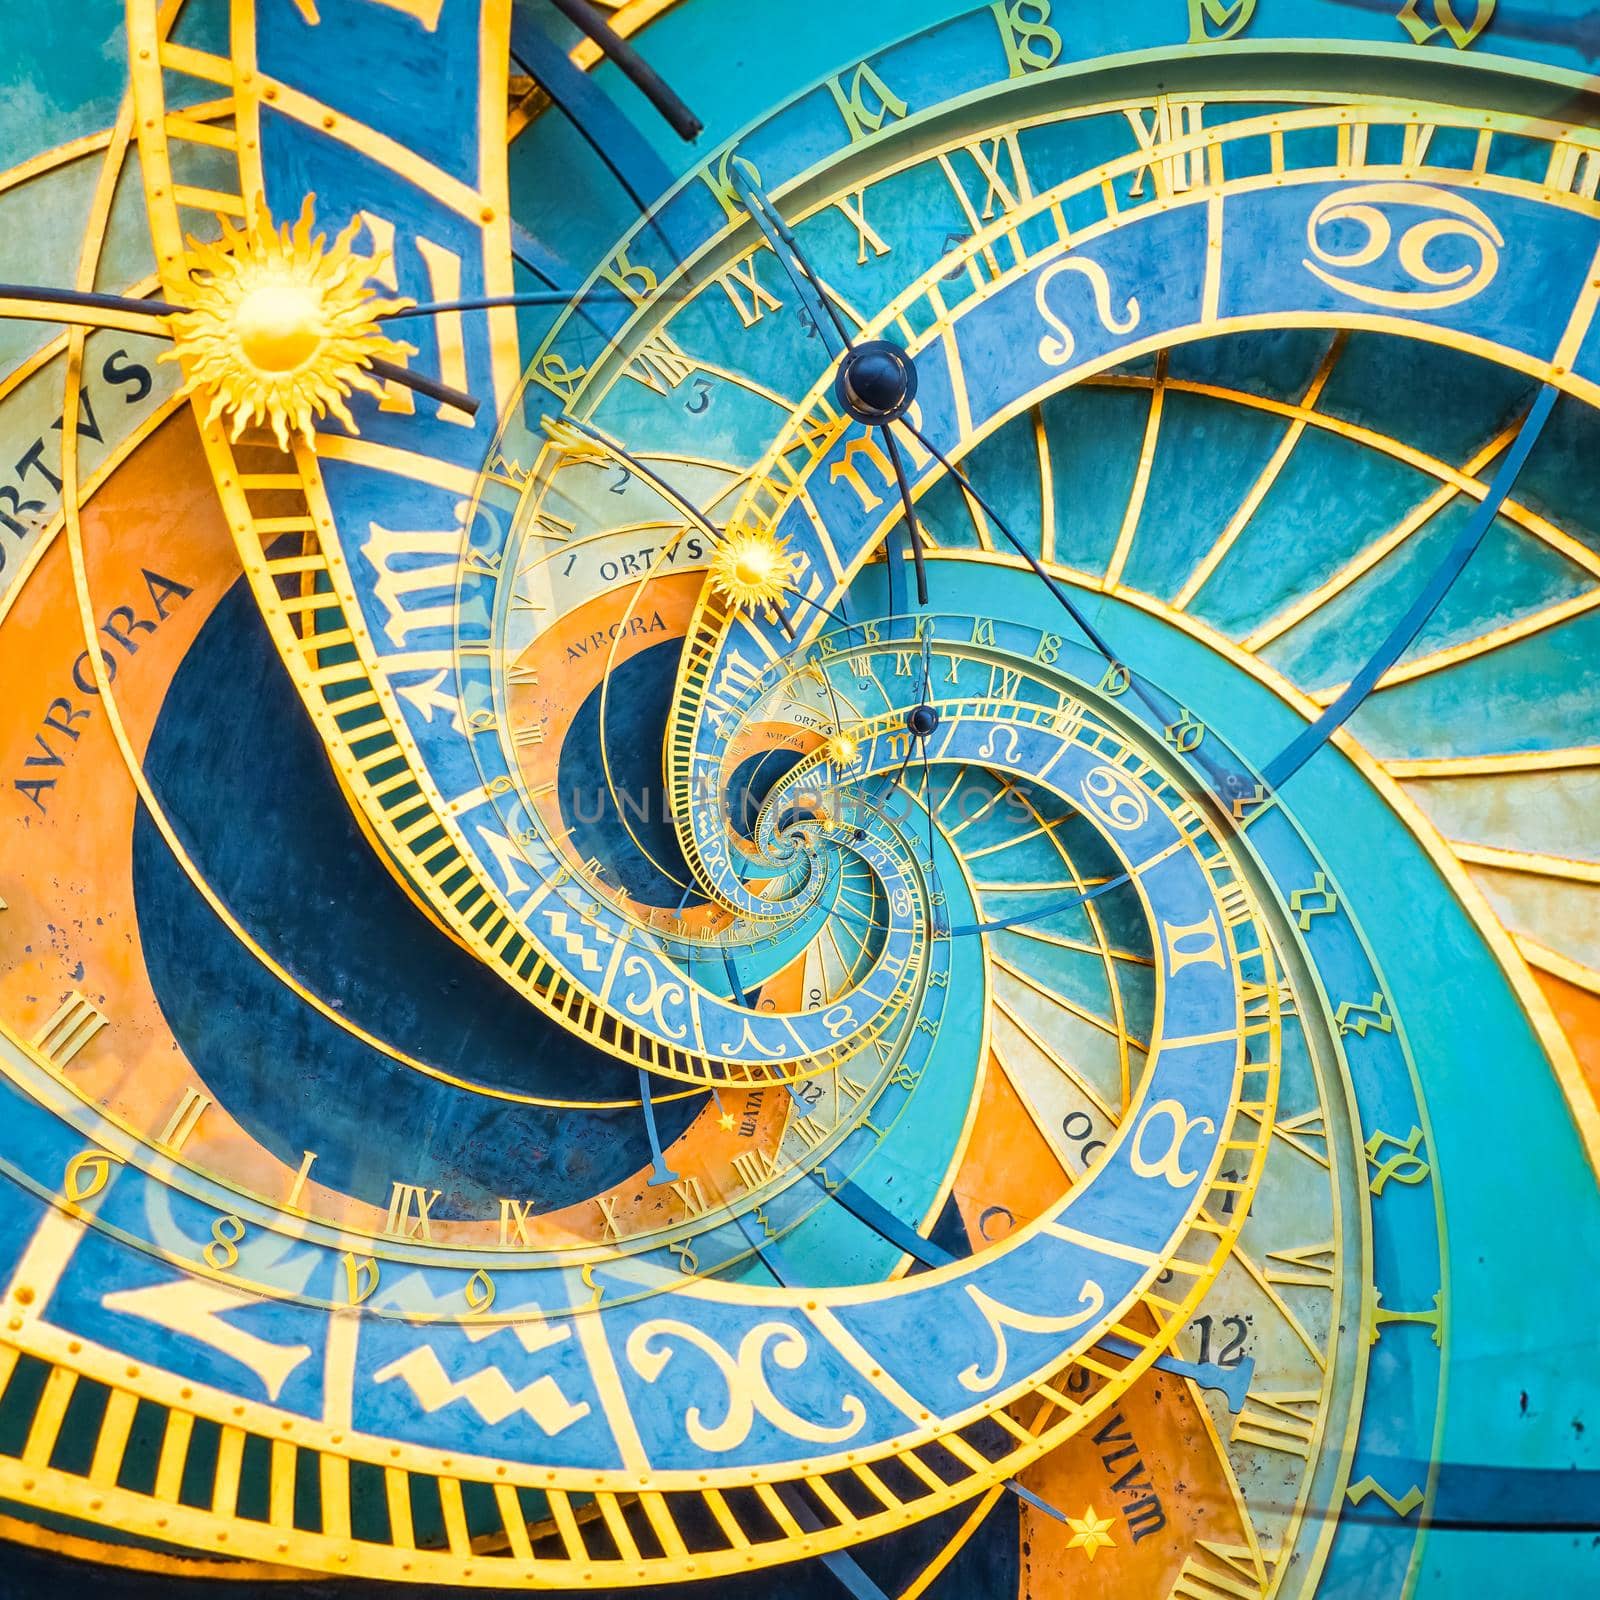 Droste effect background based on Prague astronomical clock. Abstract design for concepts related to astrology and fantasy. by Perseomedusa